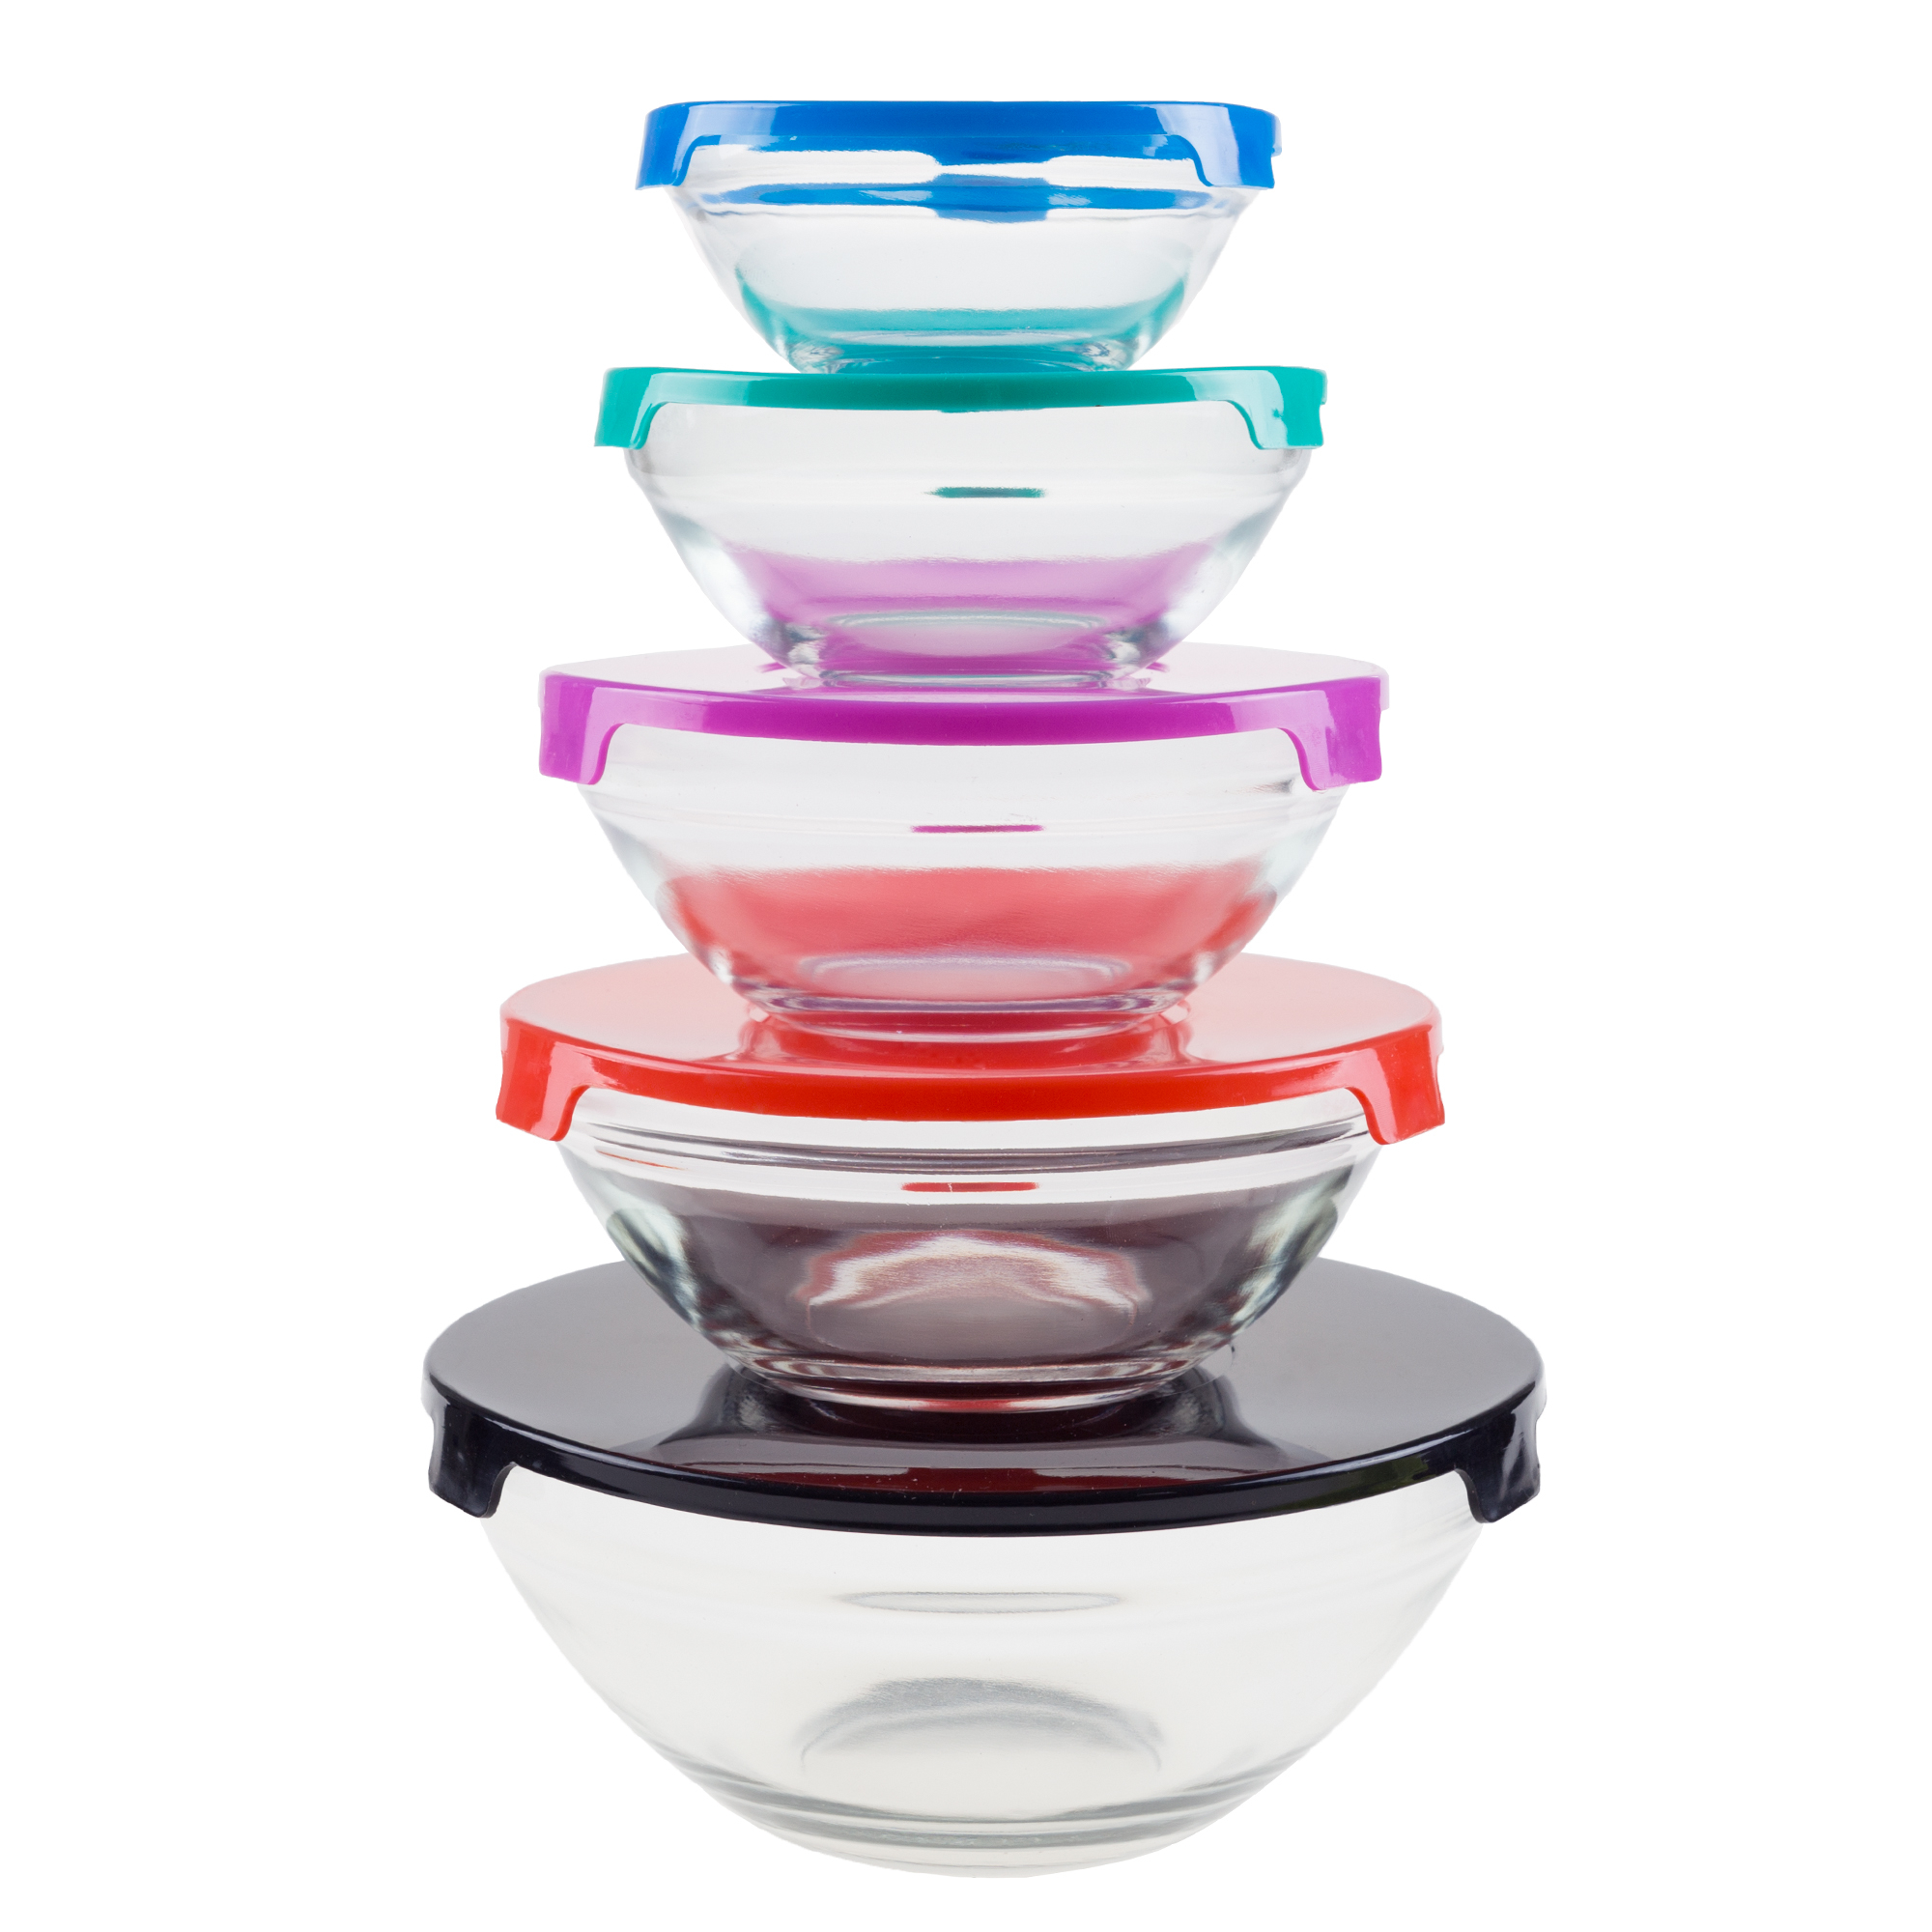 Glass Bowl Set 10 Pieces with Multi Colored Plastic Lids by Chef Buddy